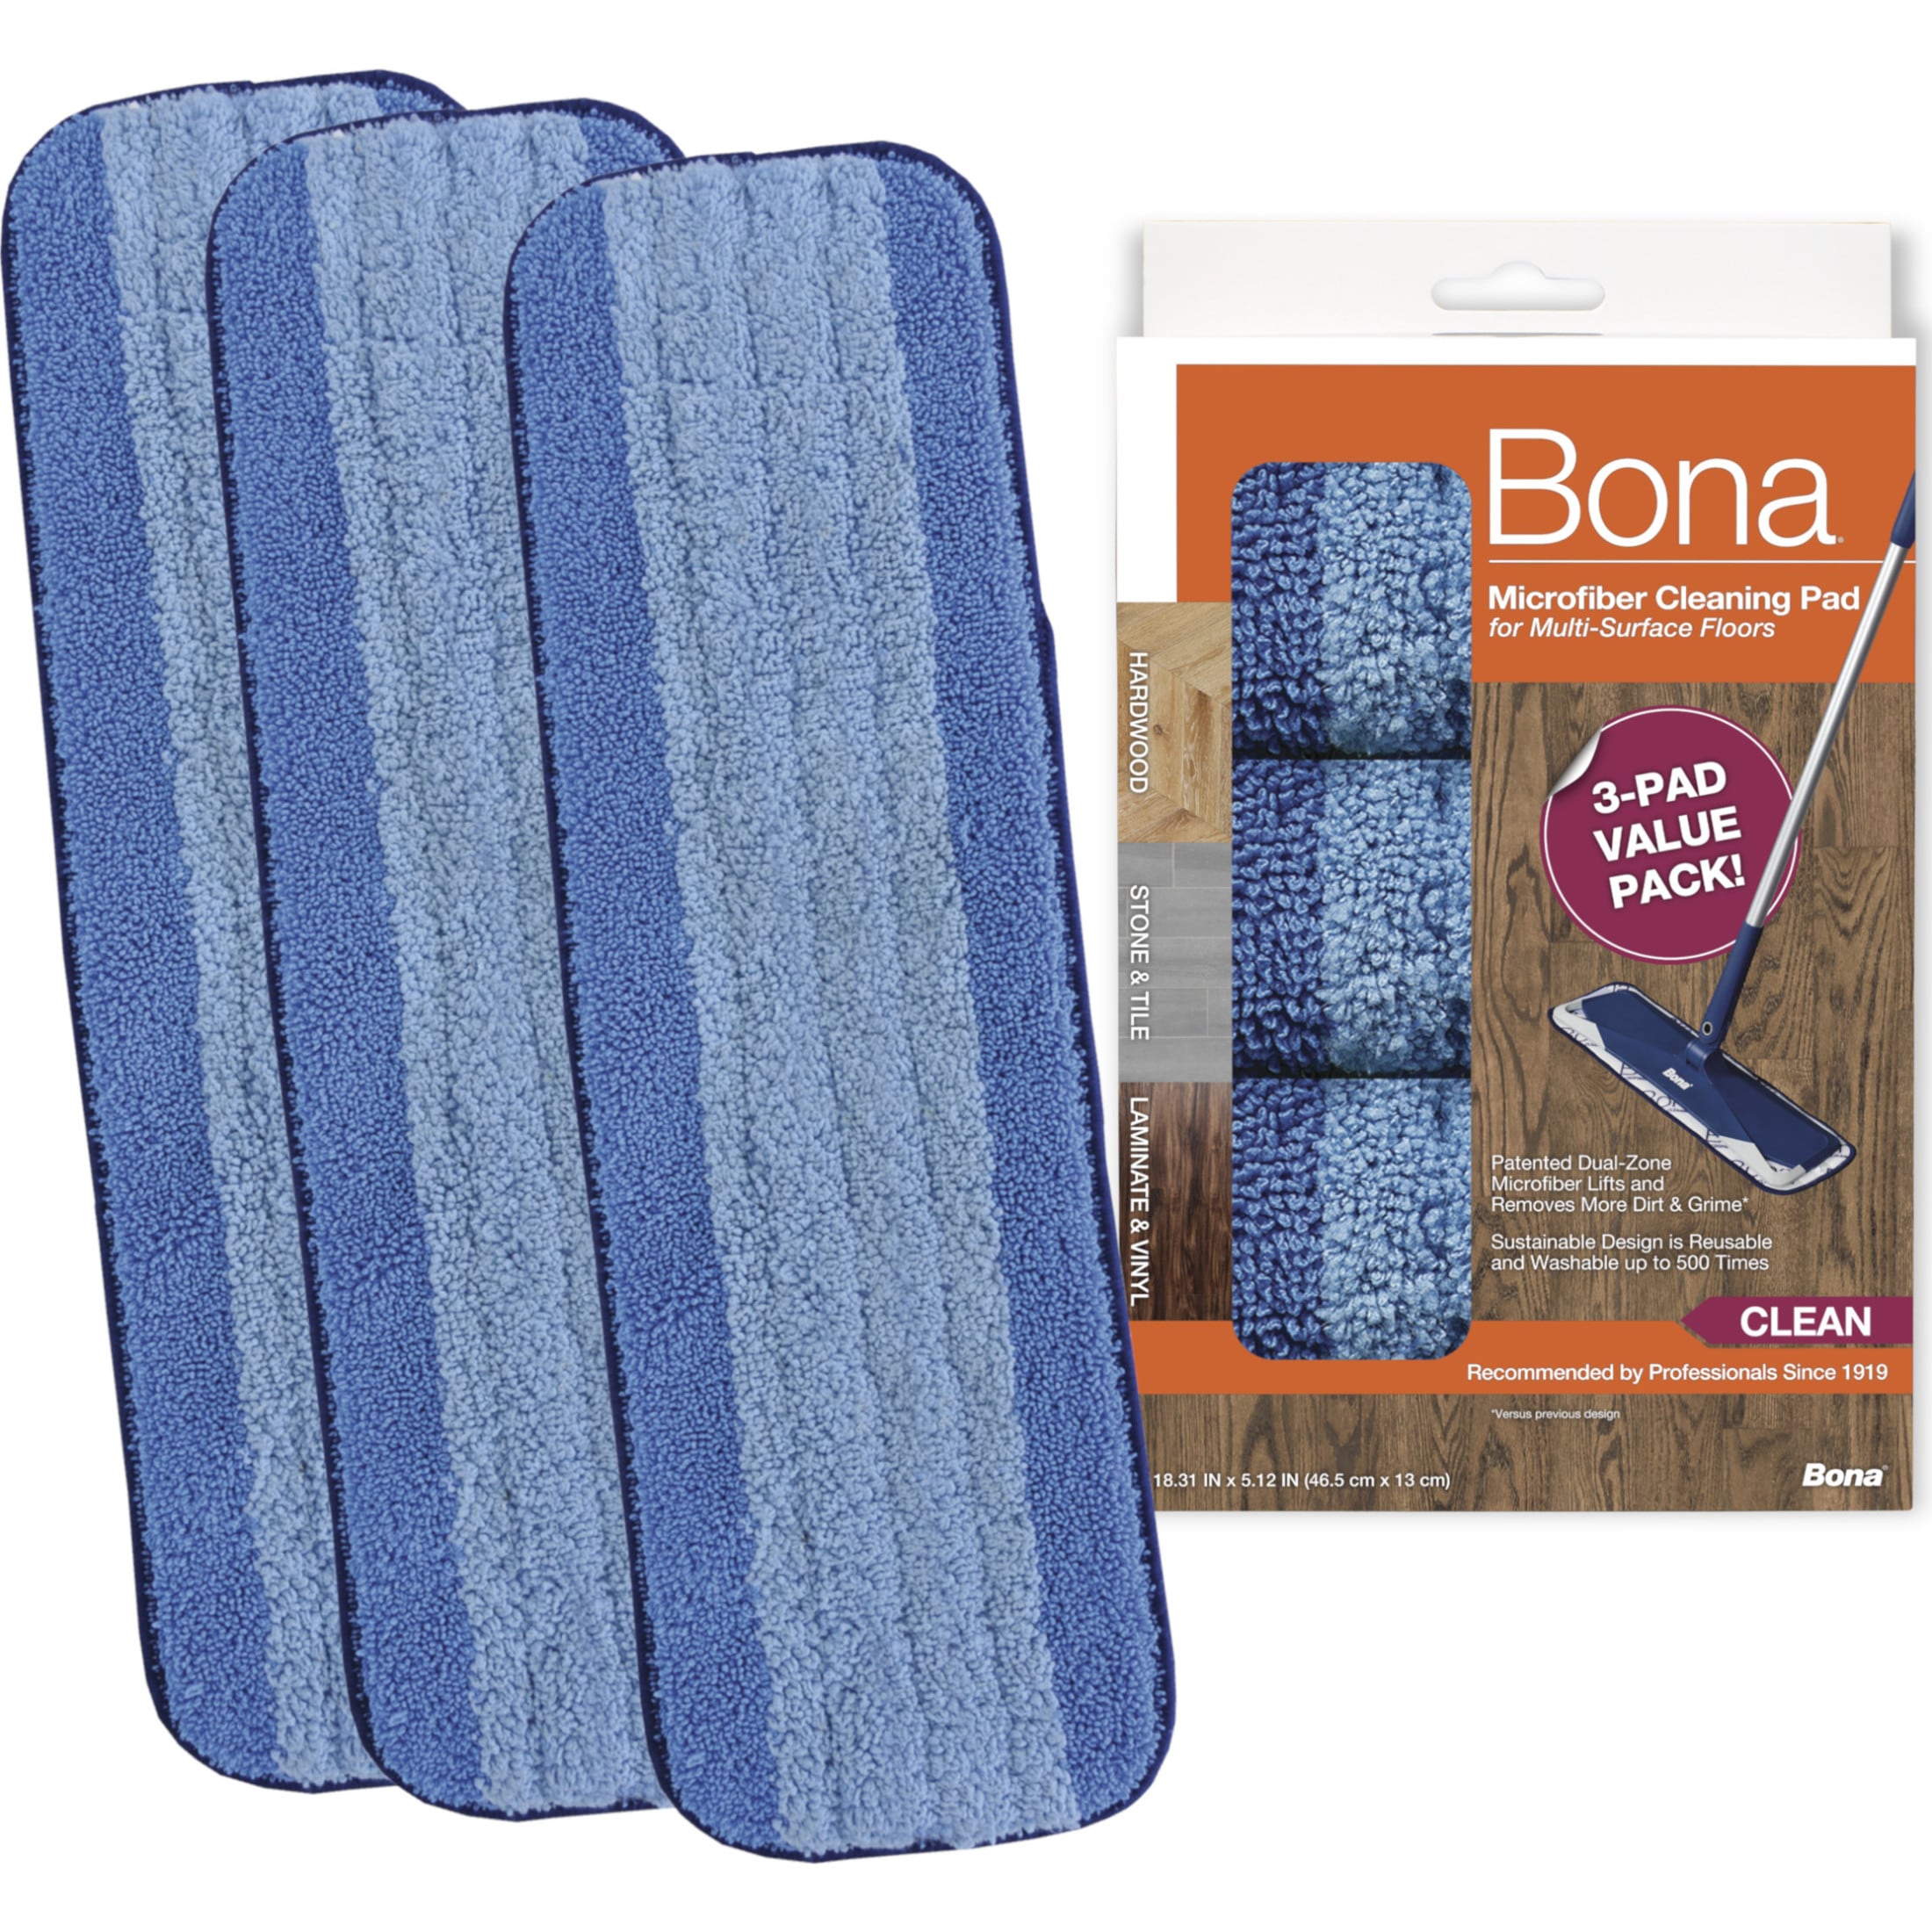 Bona Commercial System Microfiber Cleaning Pad Blue 24